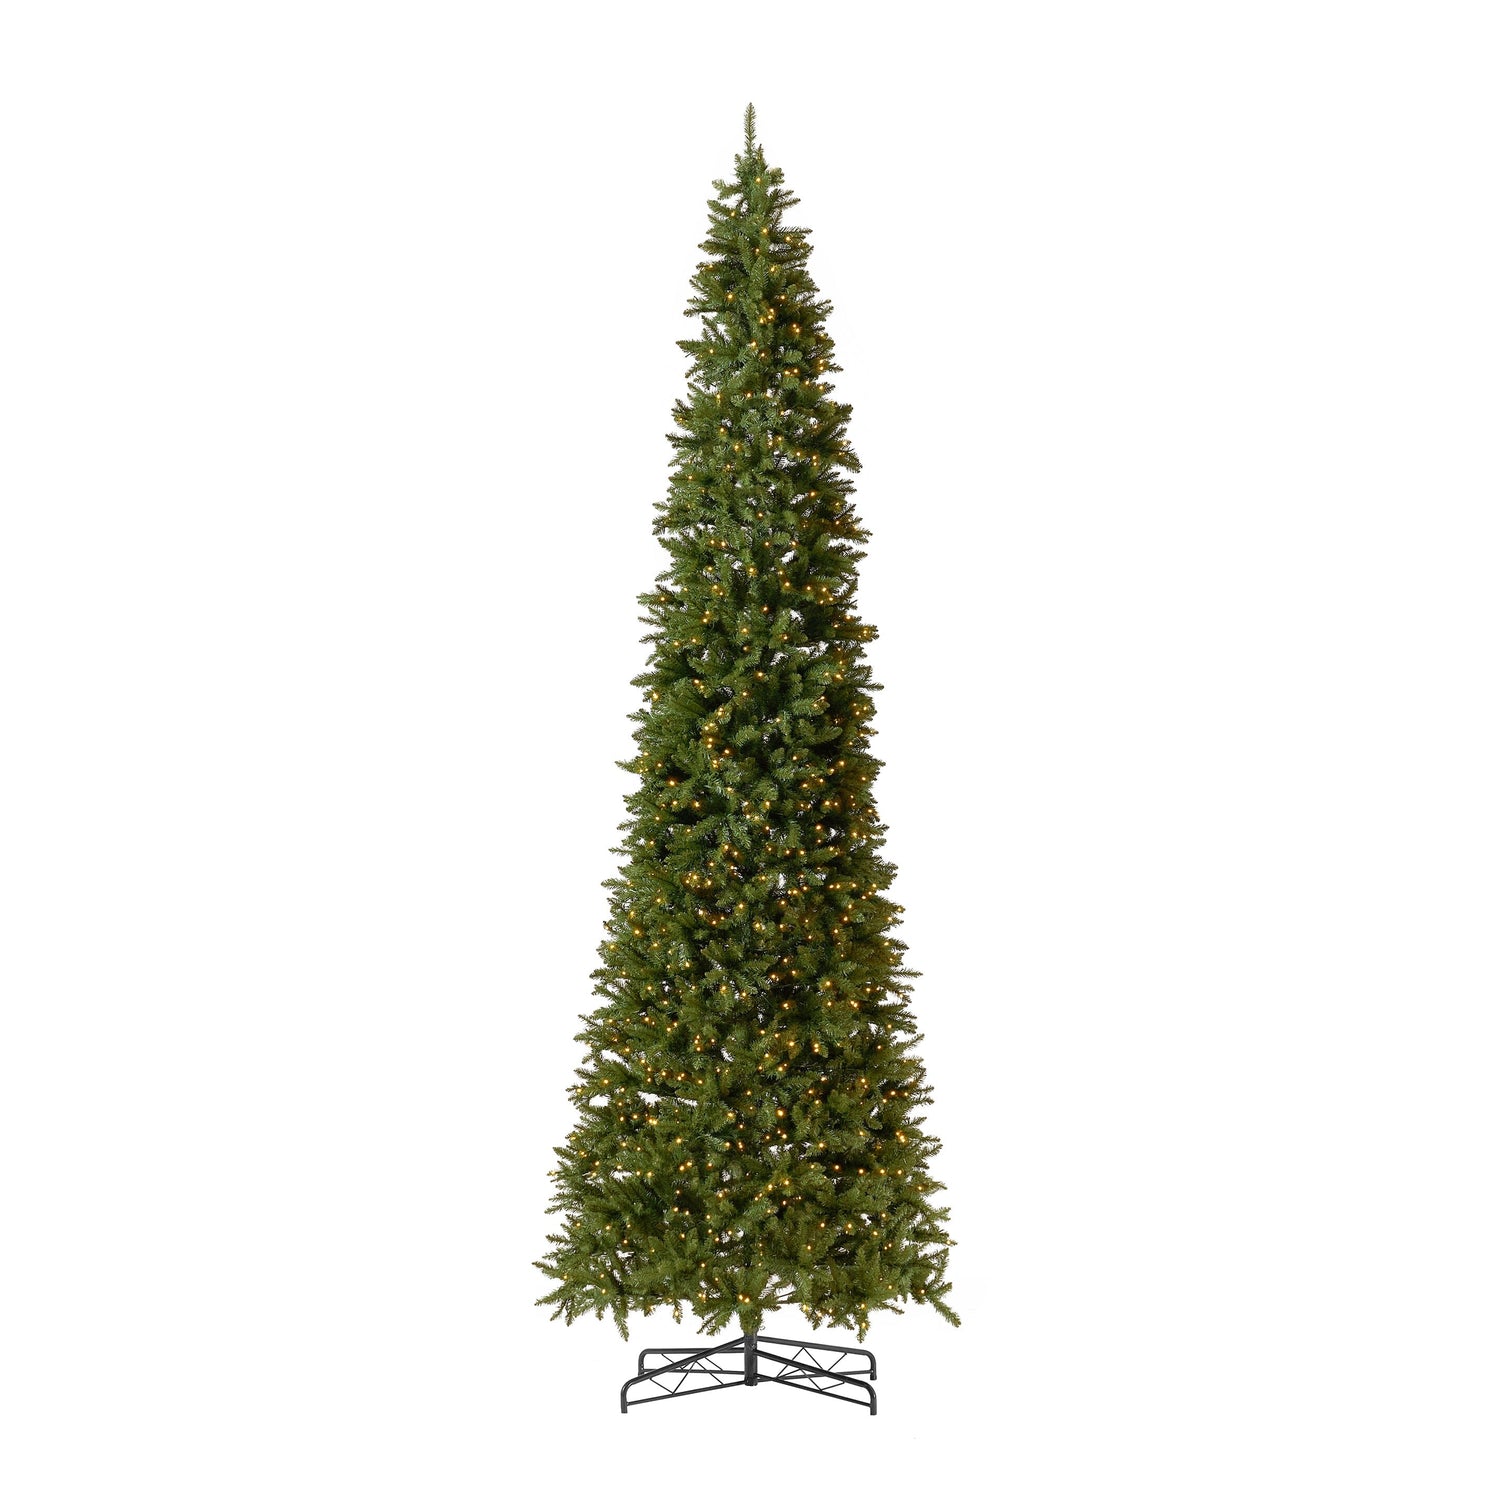 13’ Artificial Slim Green Mountain Pine Christmas Tree with 1360 Warm White LED Lights and 3924 Bendable Branches